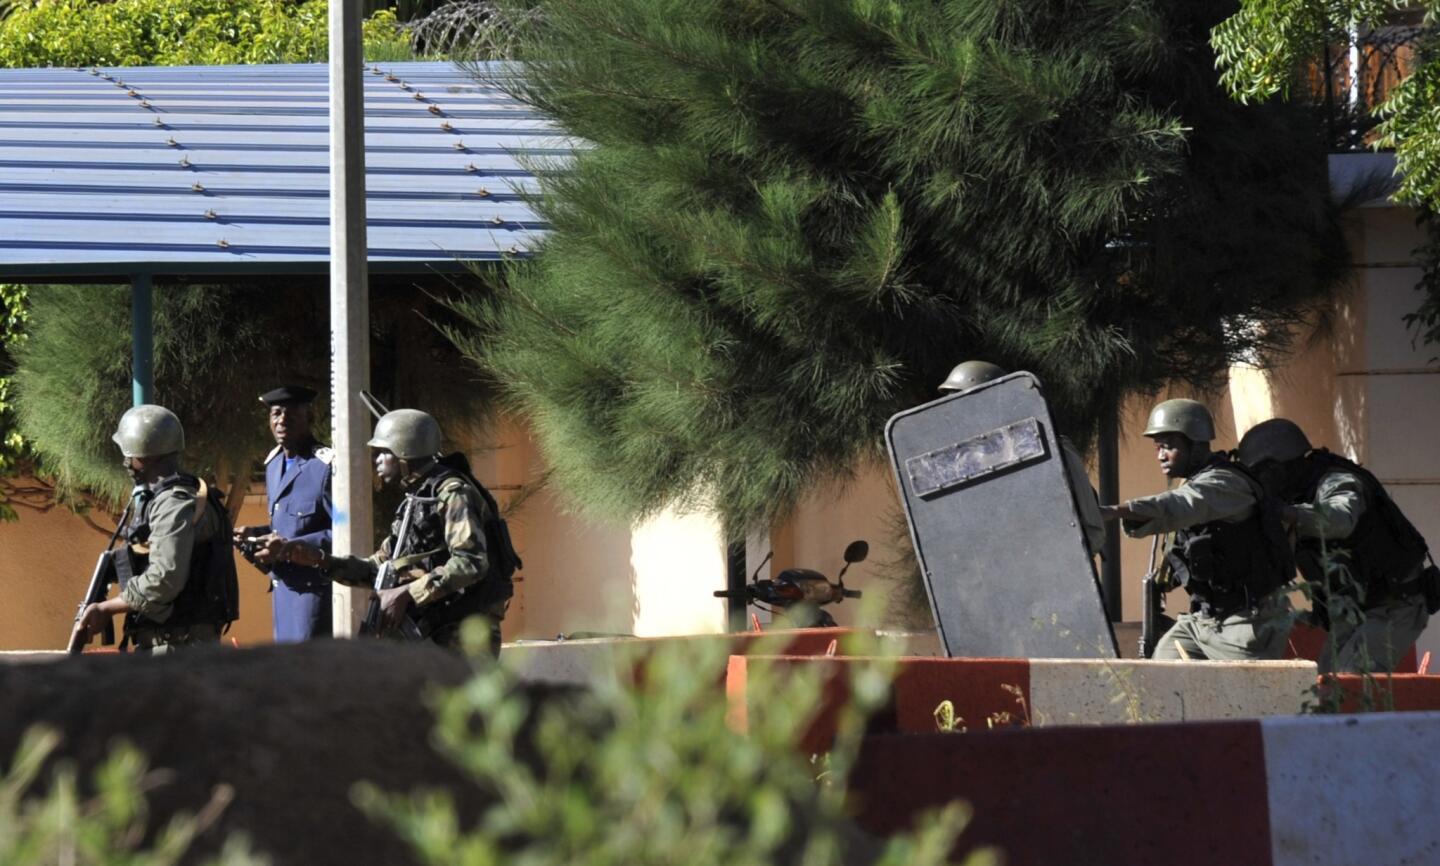 Malian troops take position outside the Radisson Blu hotel in Bamako. Gunmen went on a shooting rampage at the luxury hotel in Mali's capital, seizing 170 guests and staff. At least three people are dead.